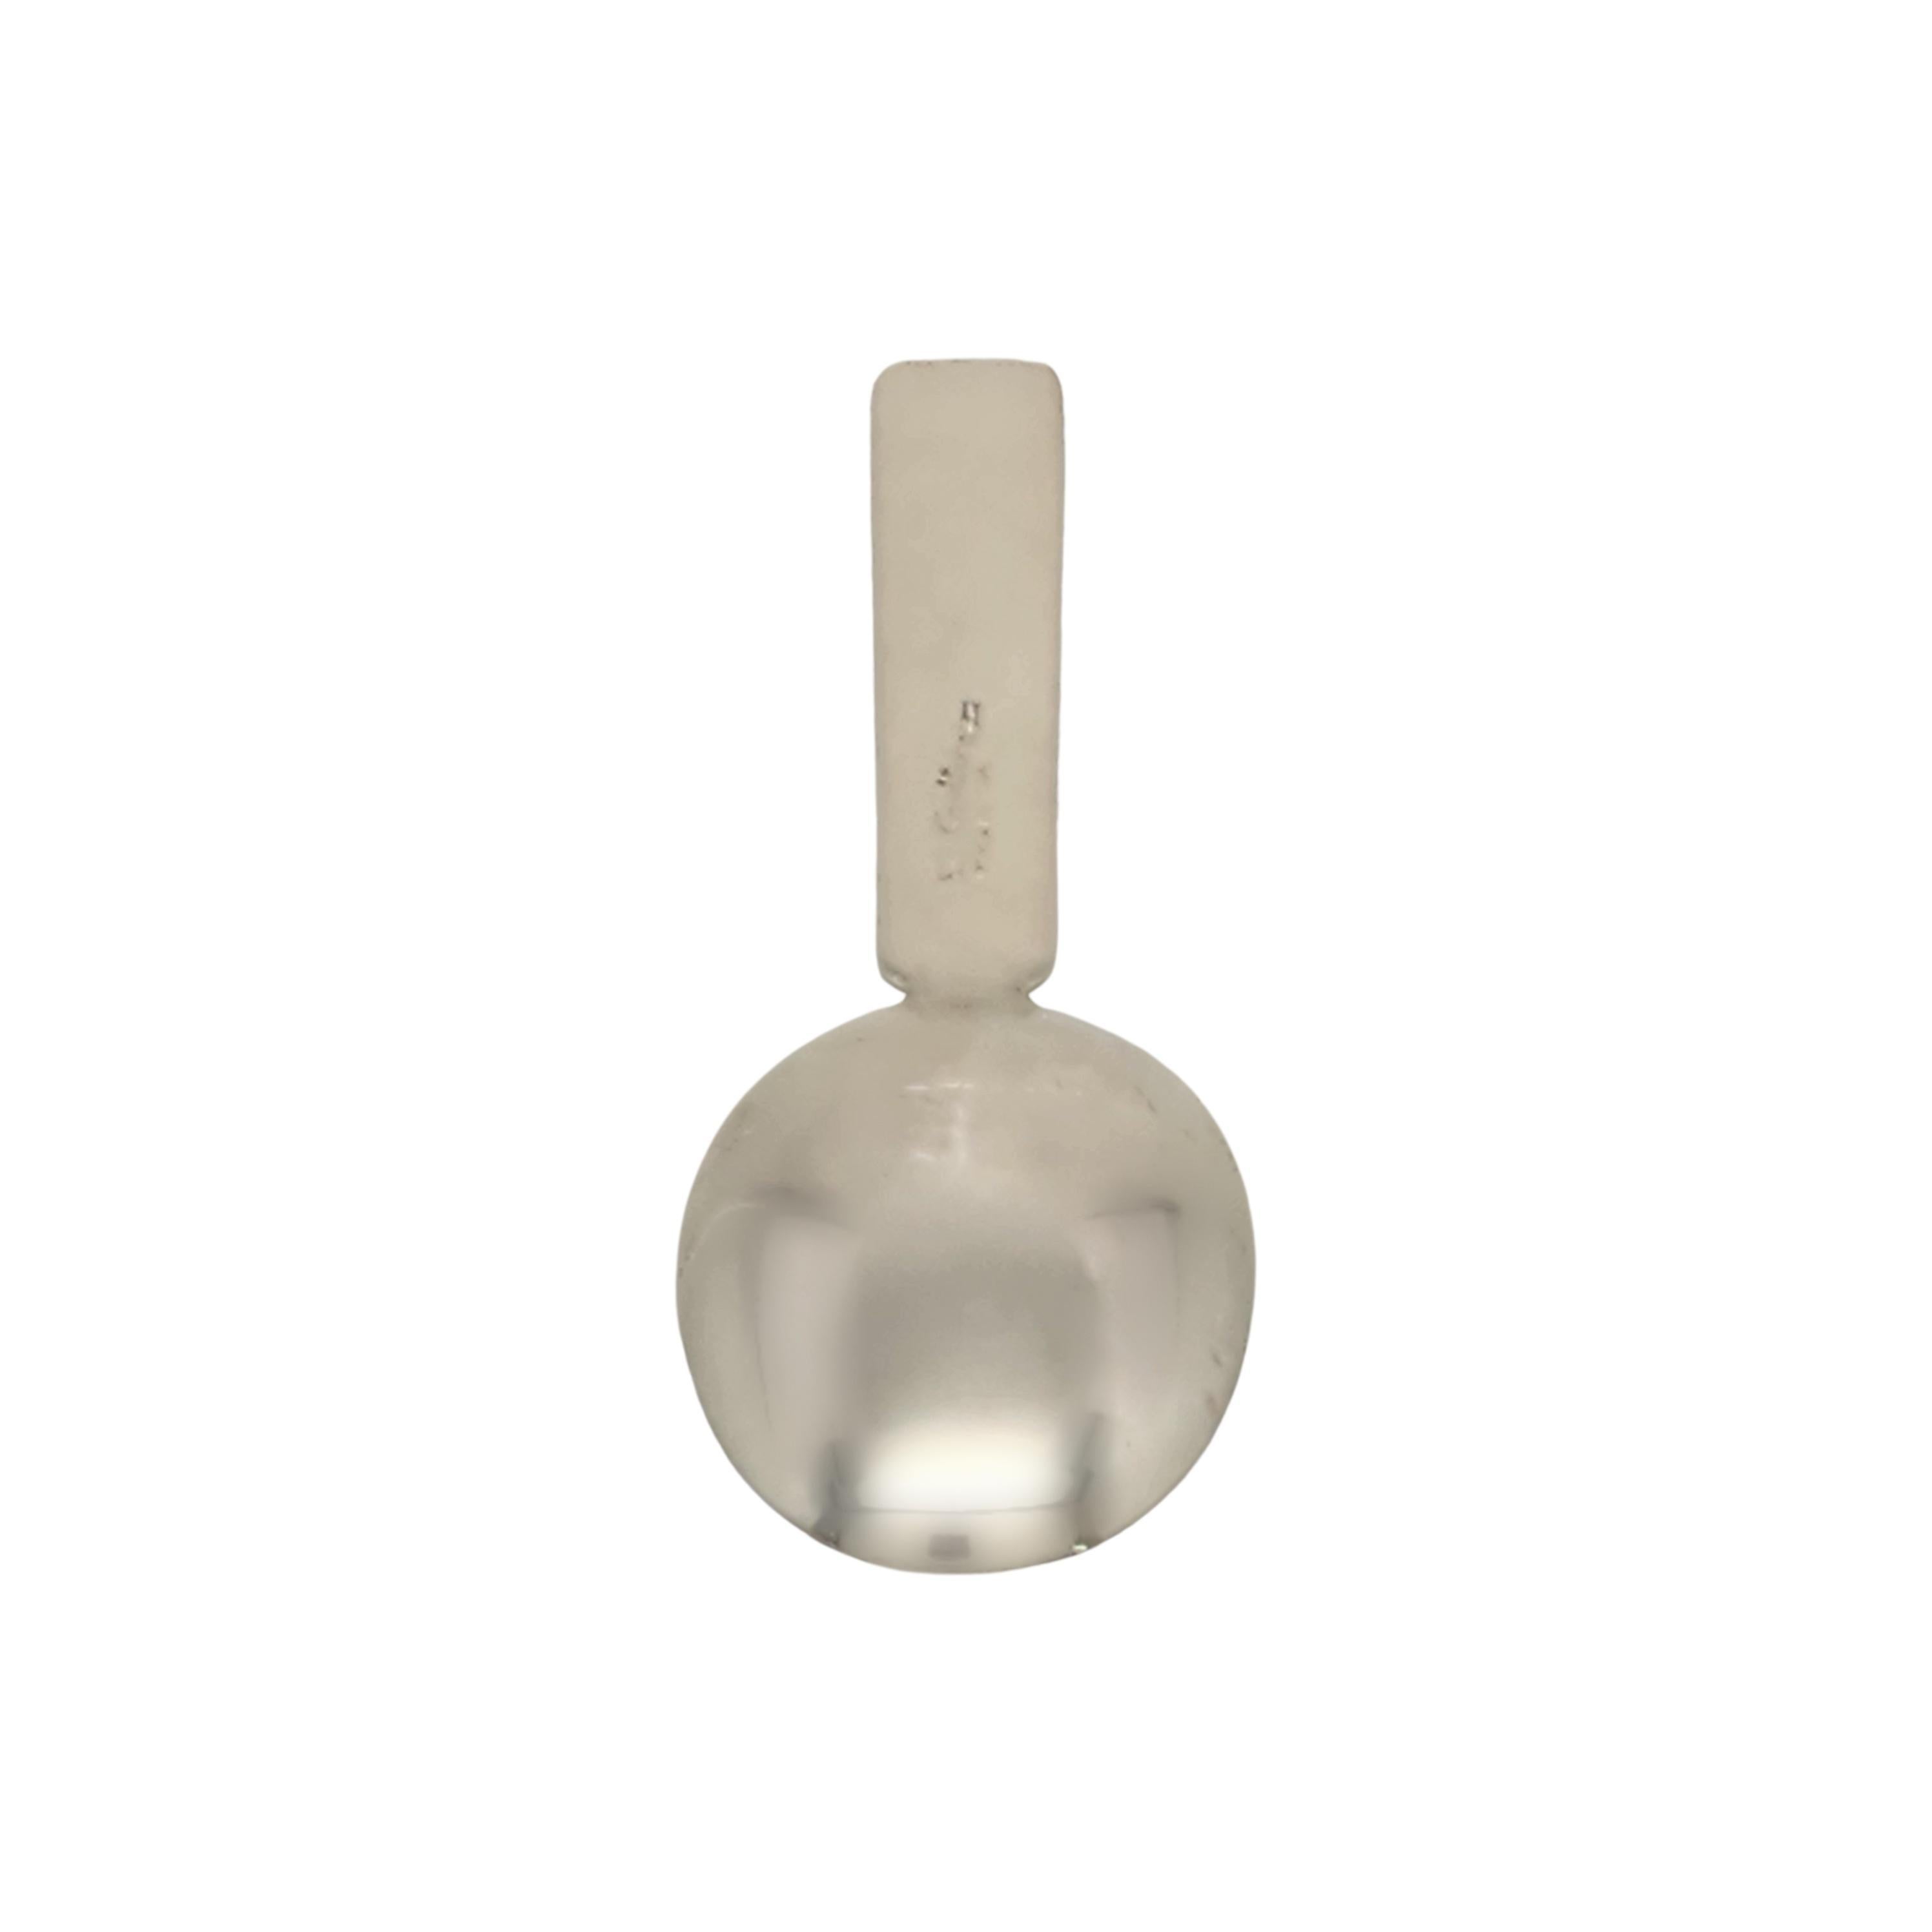 Sterling silver baby spoon by Dominick Haff for Cartier.

No monogram

Simple and timeless design, a rectangular handle with a smooth, polished finish.

Weighs approx 25.1g, 16.2dwt

3 7/8